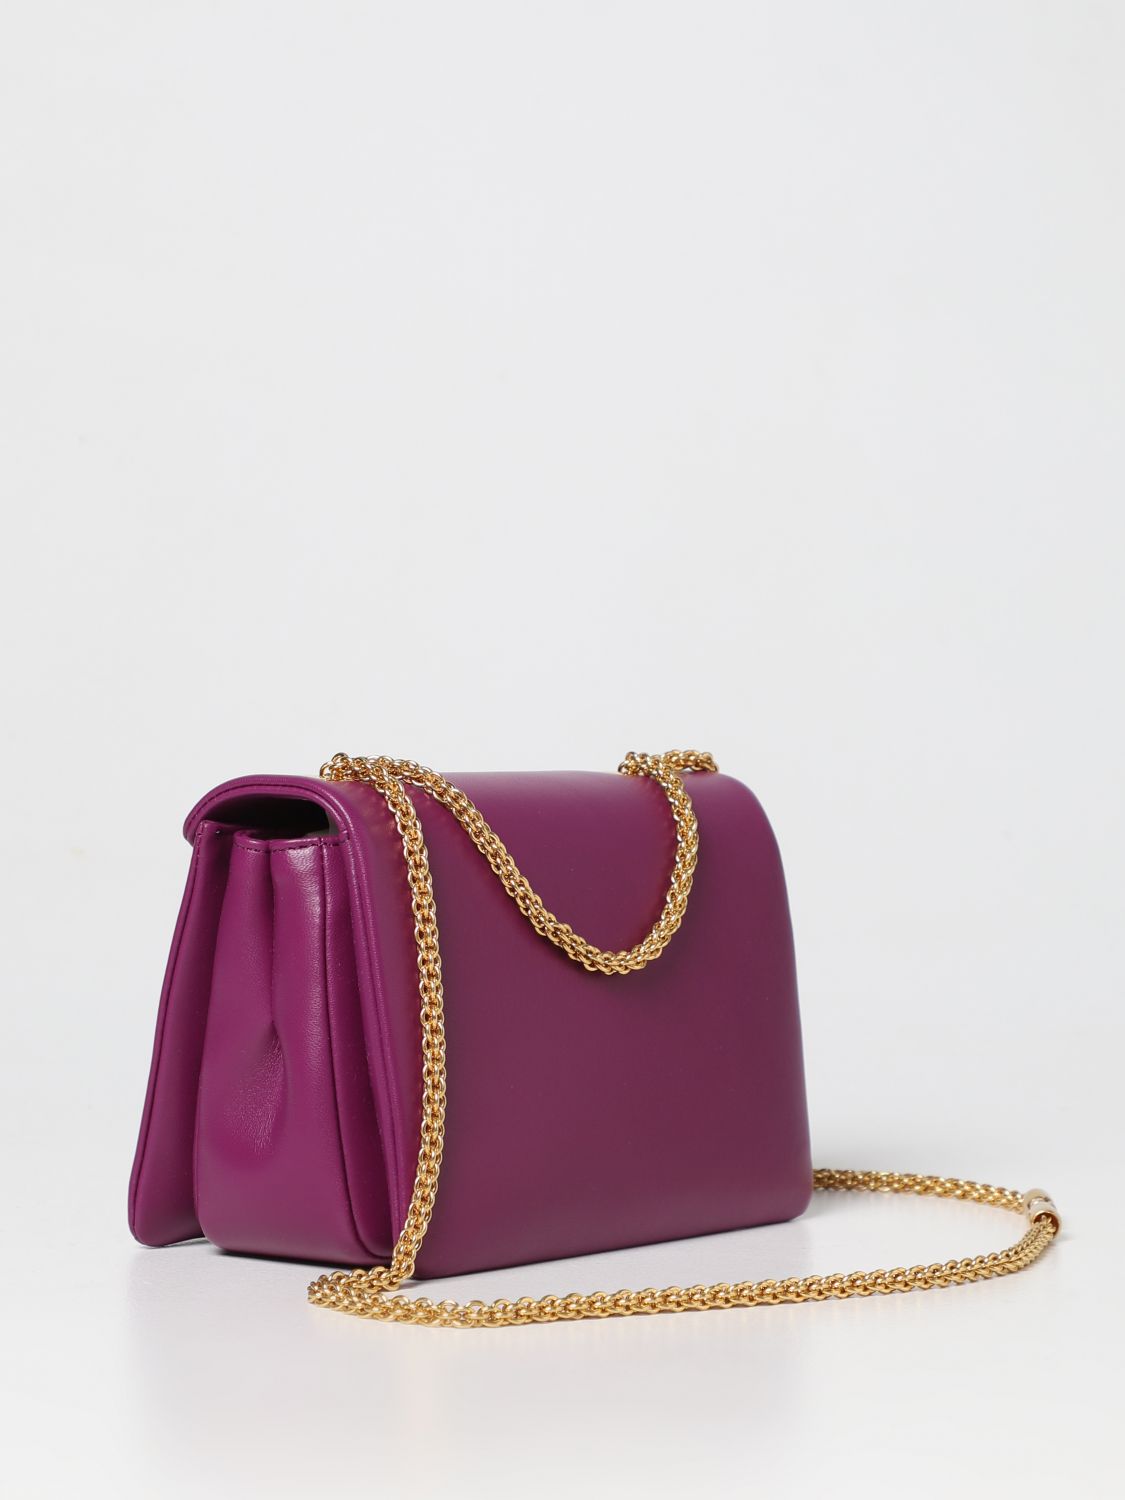 One Stud Nappa Bag With Chain for Woman in Prune